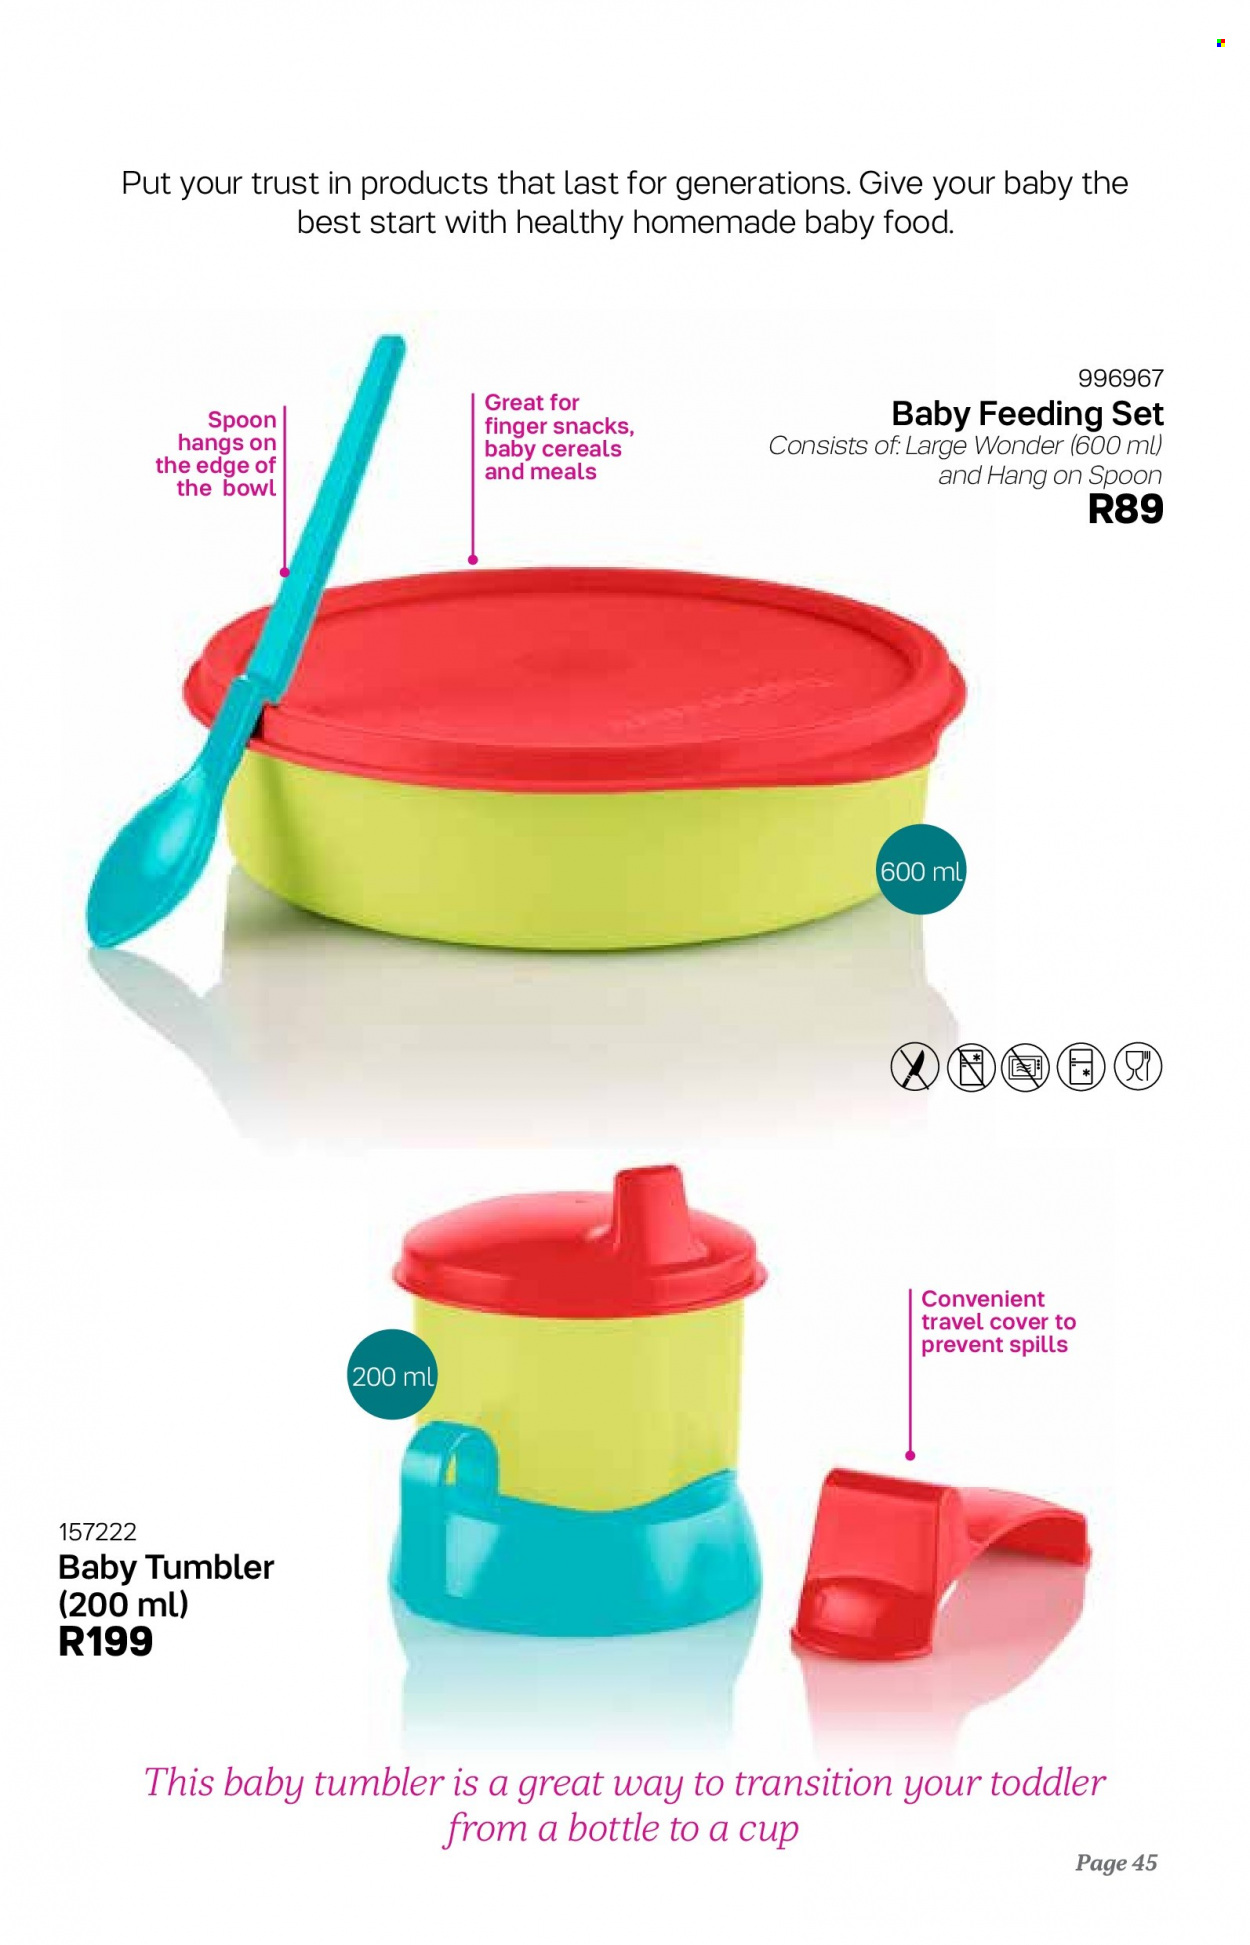 thumbnail - Tupperware Catalogue - 6.04.2022 - 6.09.2022 - Sales products - spoon, tumbler, bowl, Trust. Page 45.